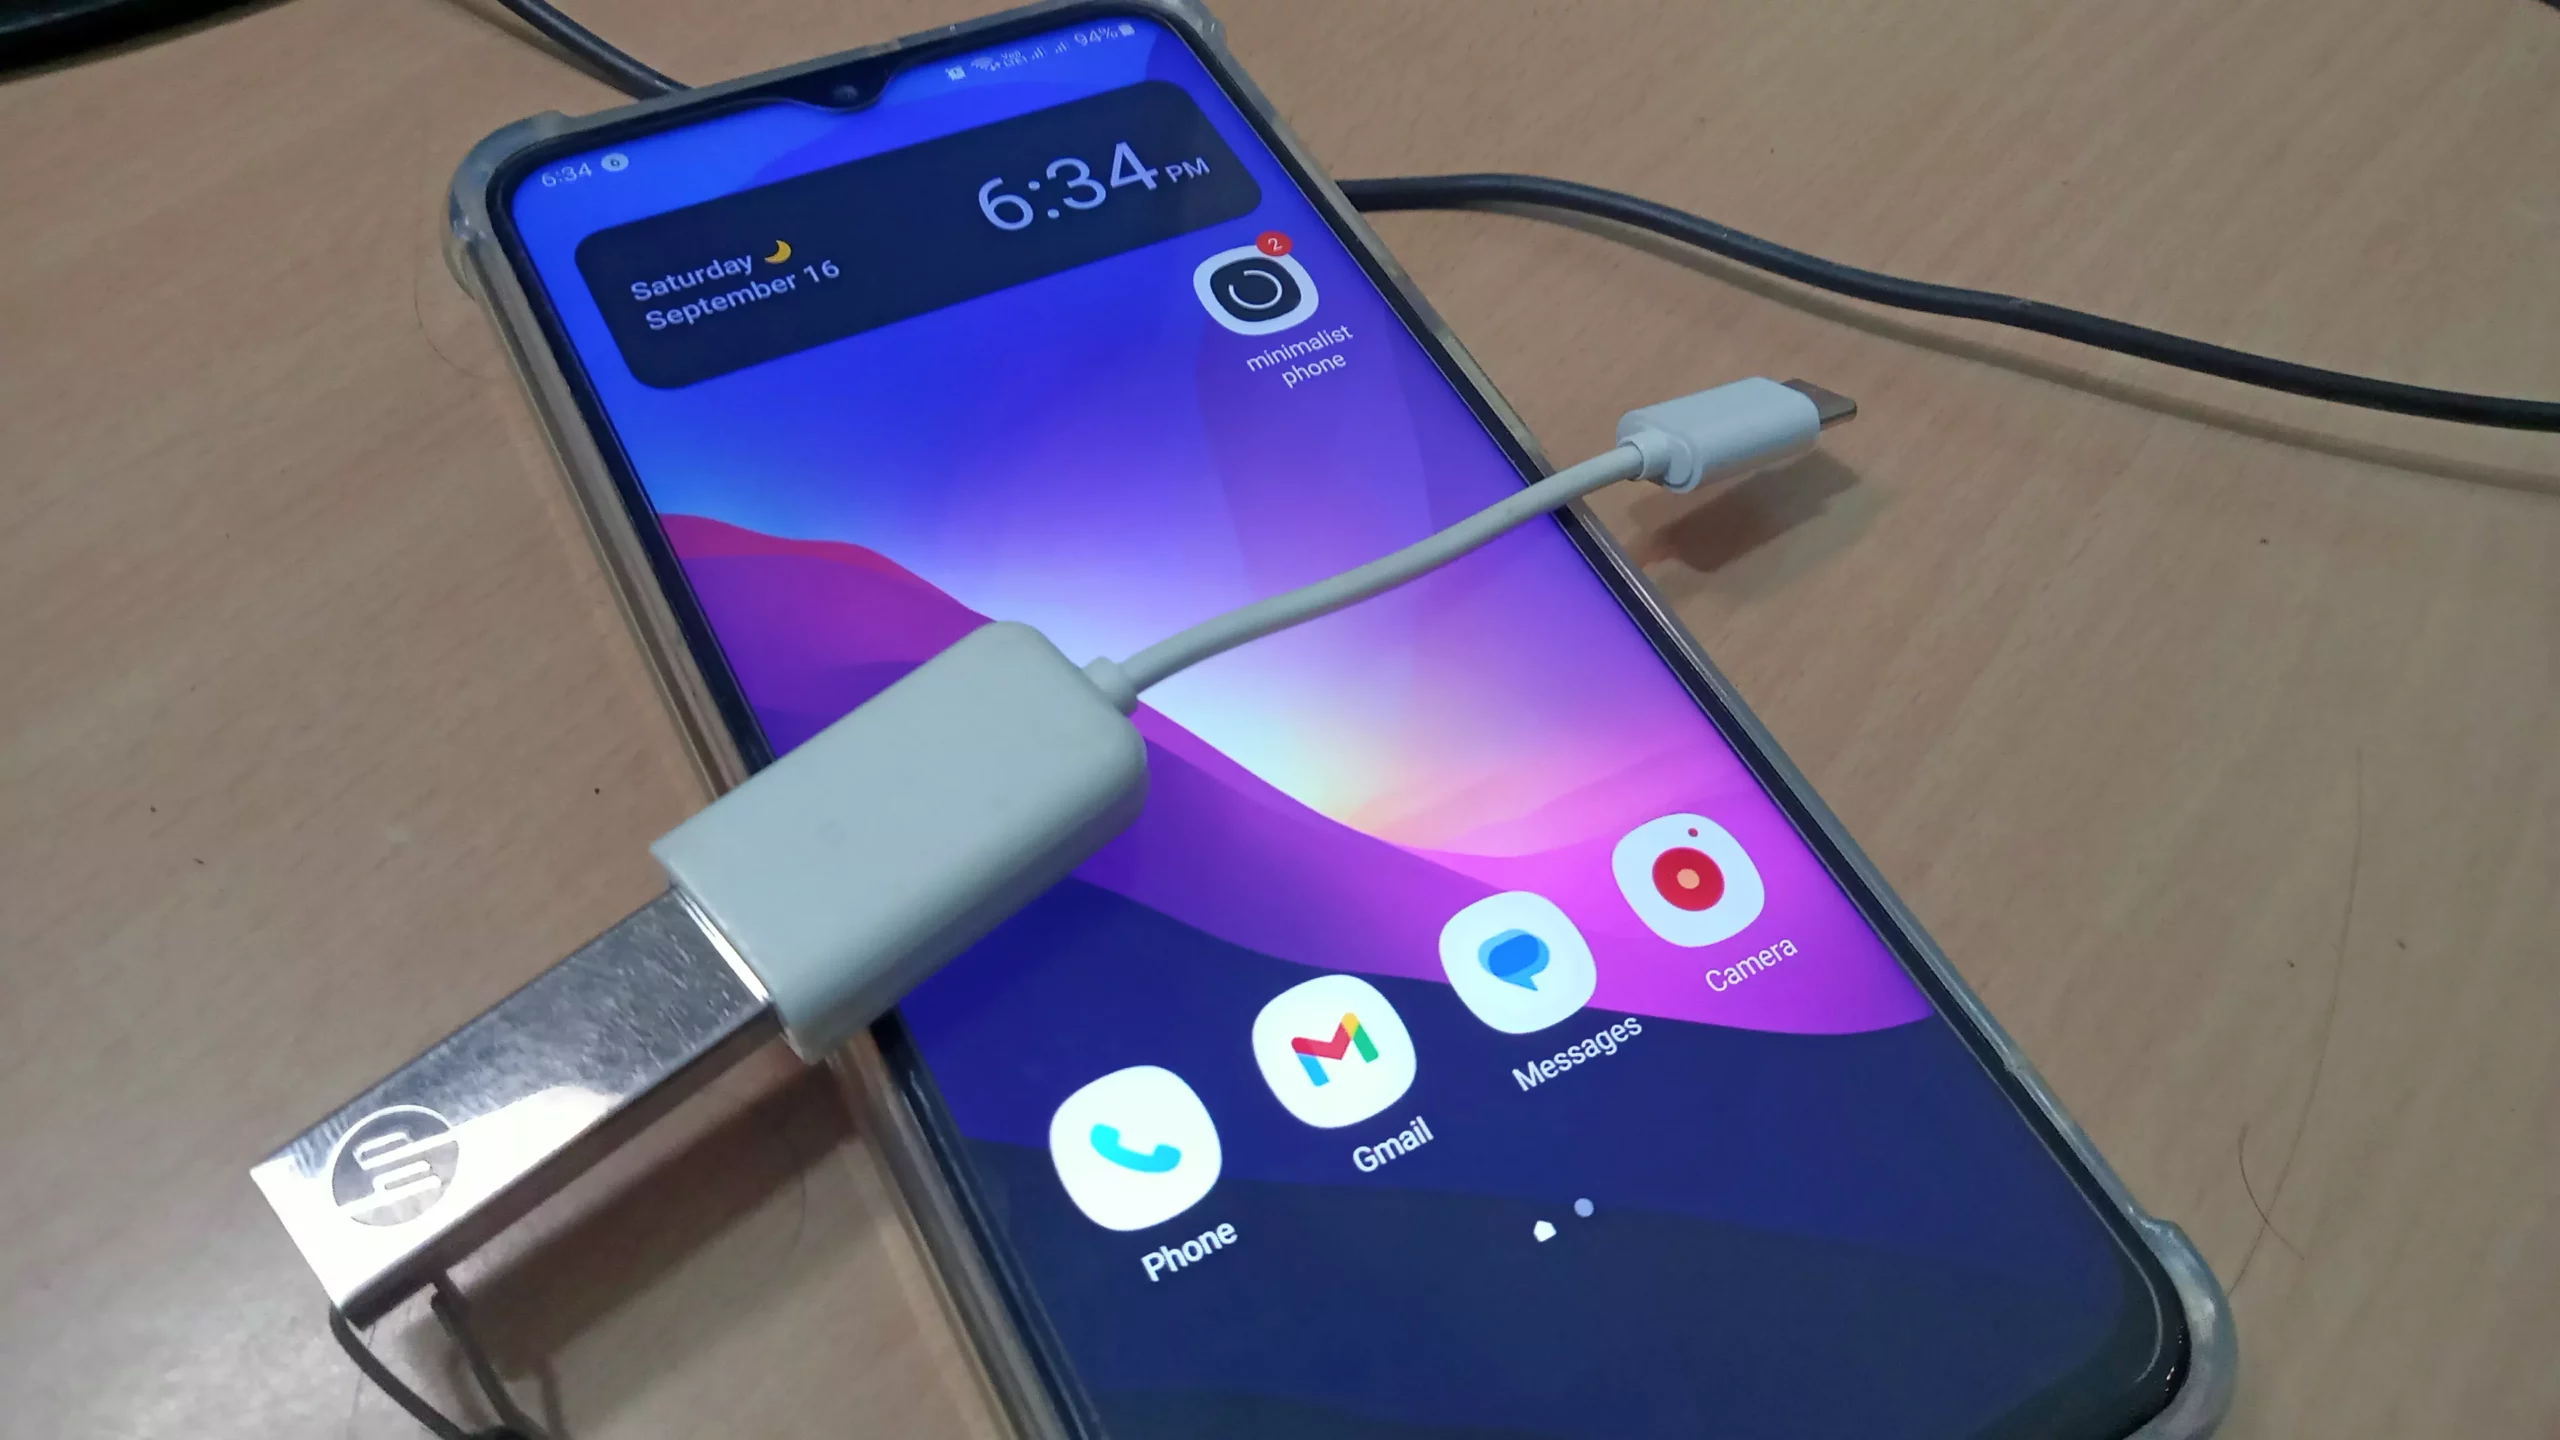 pendrive with otg connected with samsung phone